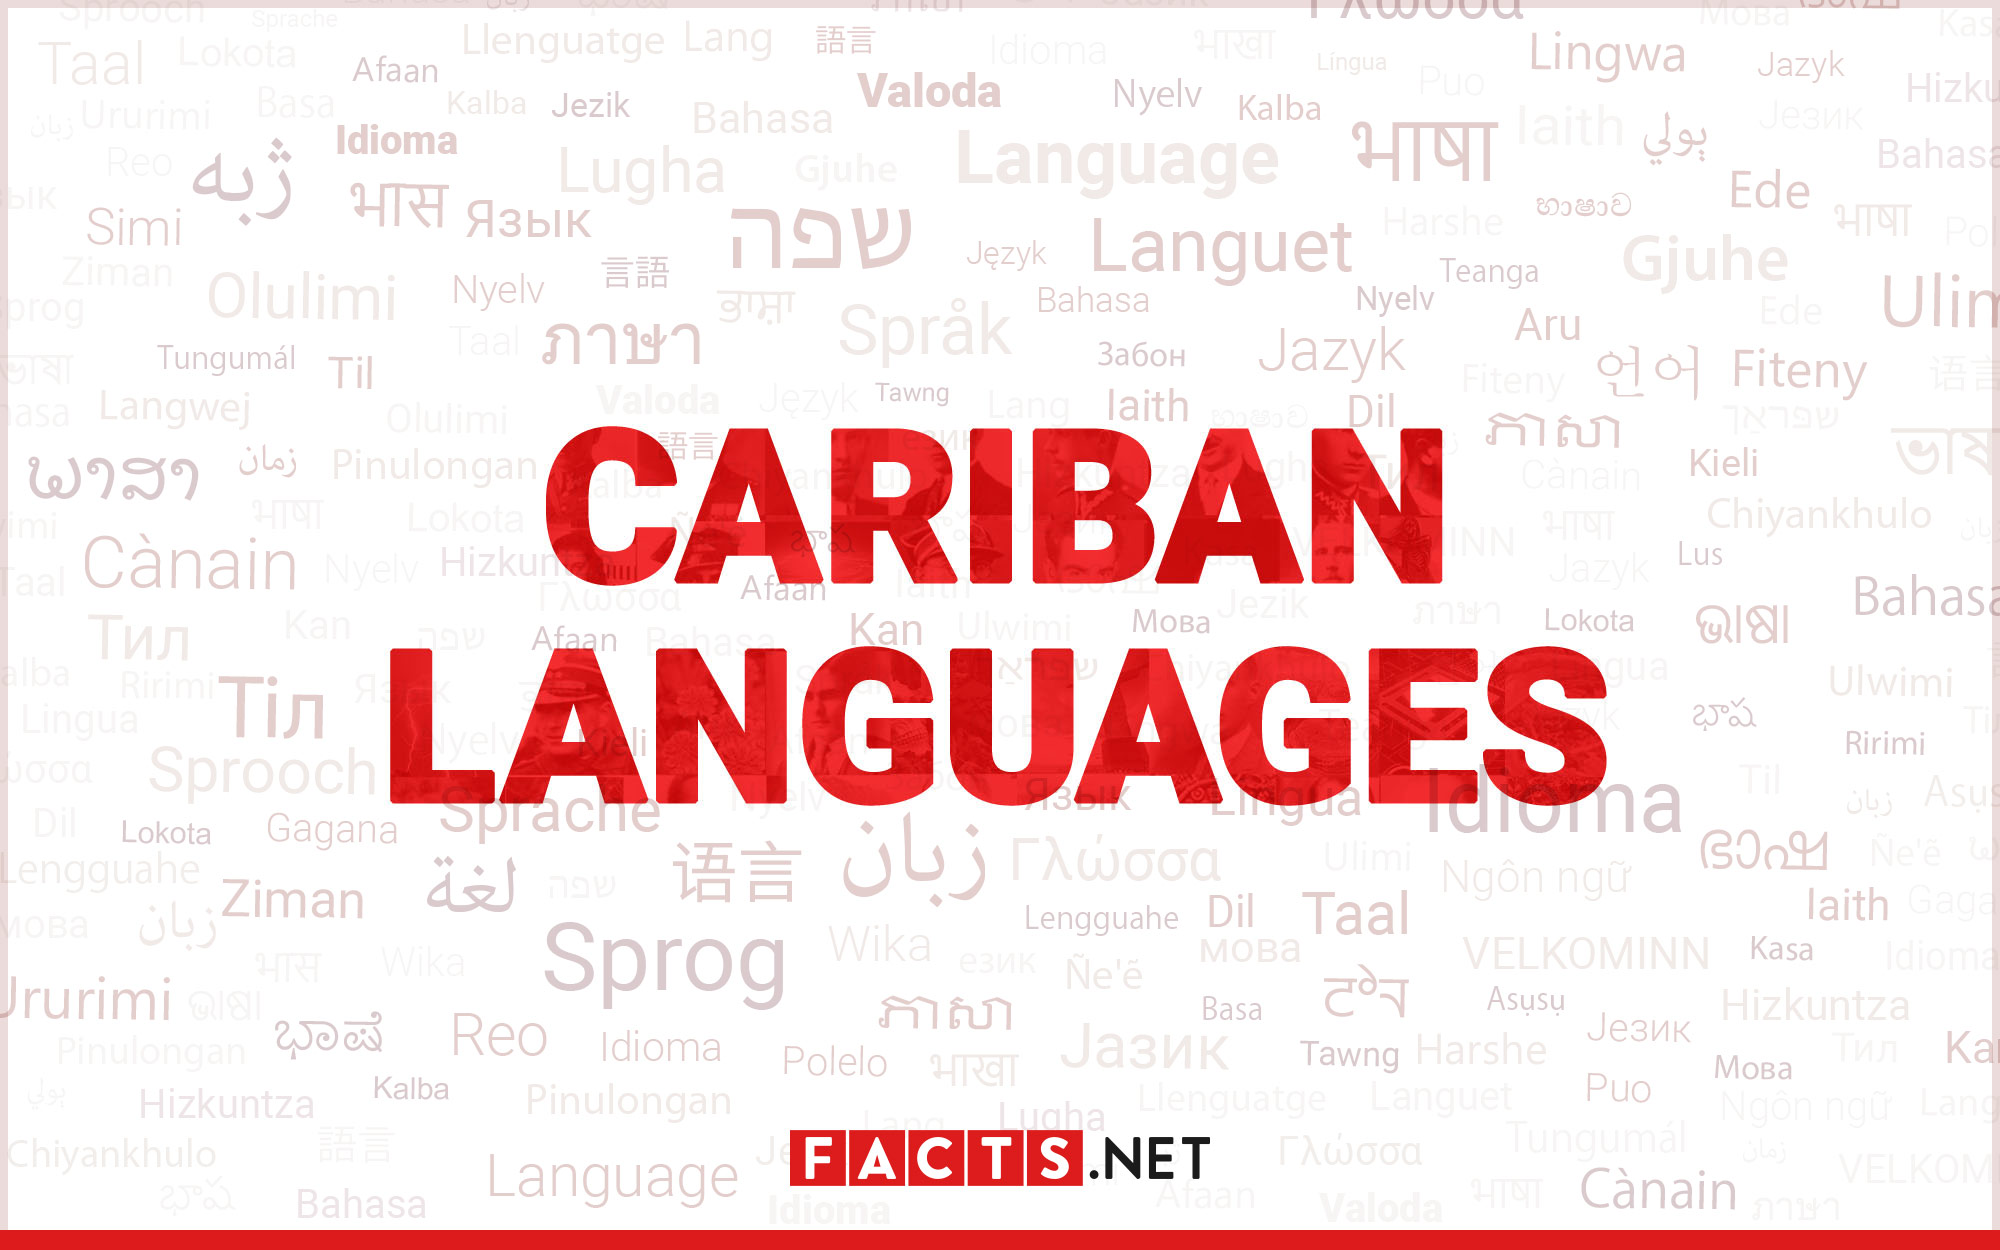 8-astounding-facts-about-cariban-languages